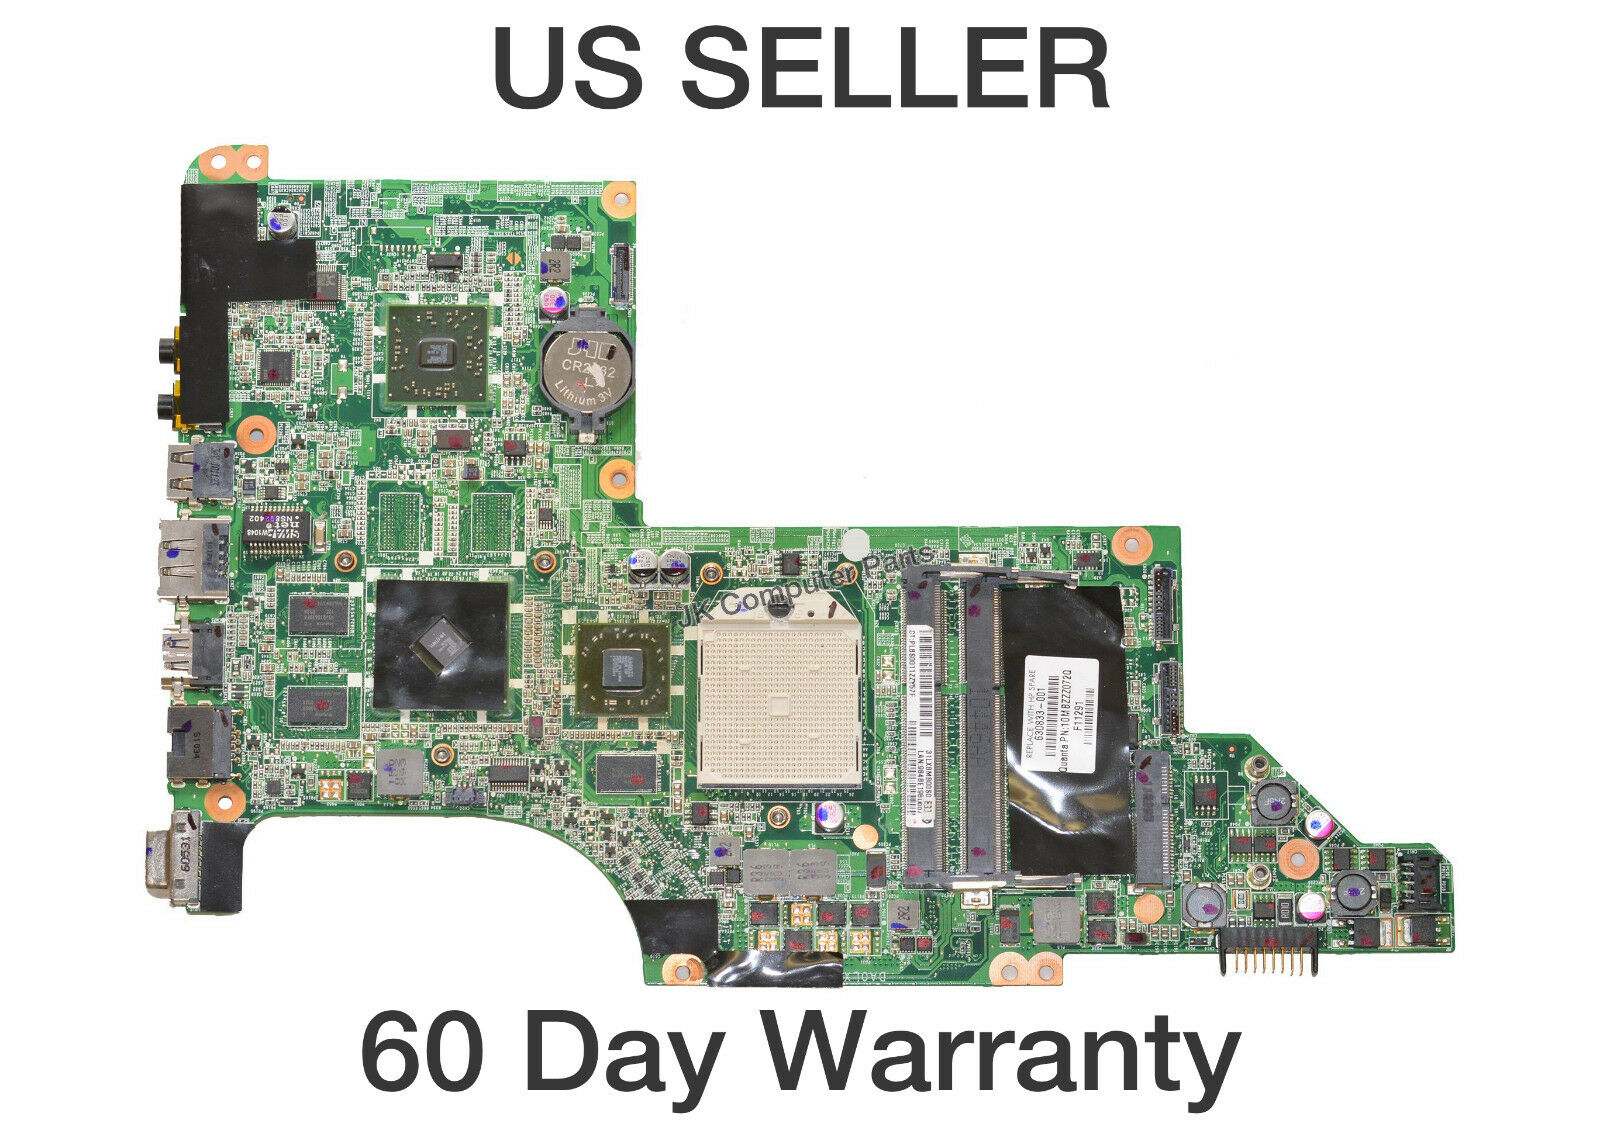 HP DV7-4267CL DV7-4270US DV7-4273US AMD Laptop Motherboard s1 630833-001 Brand: HP Compatible CPU Brand: AM - Click Image to Close